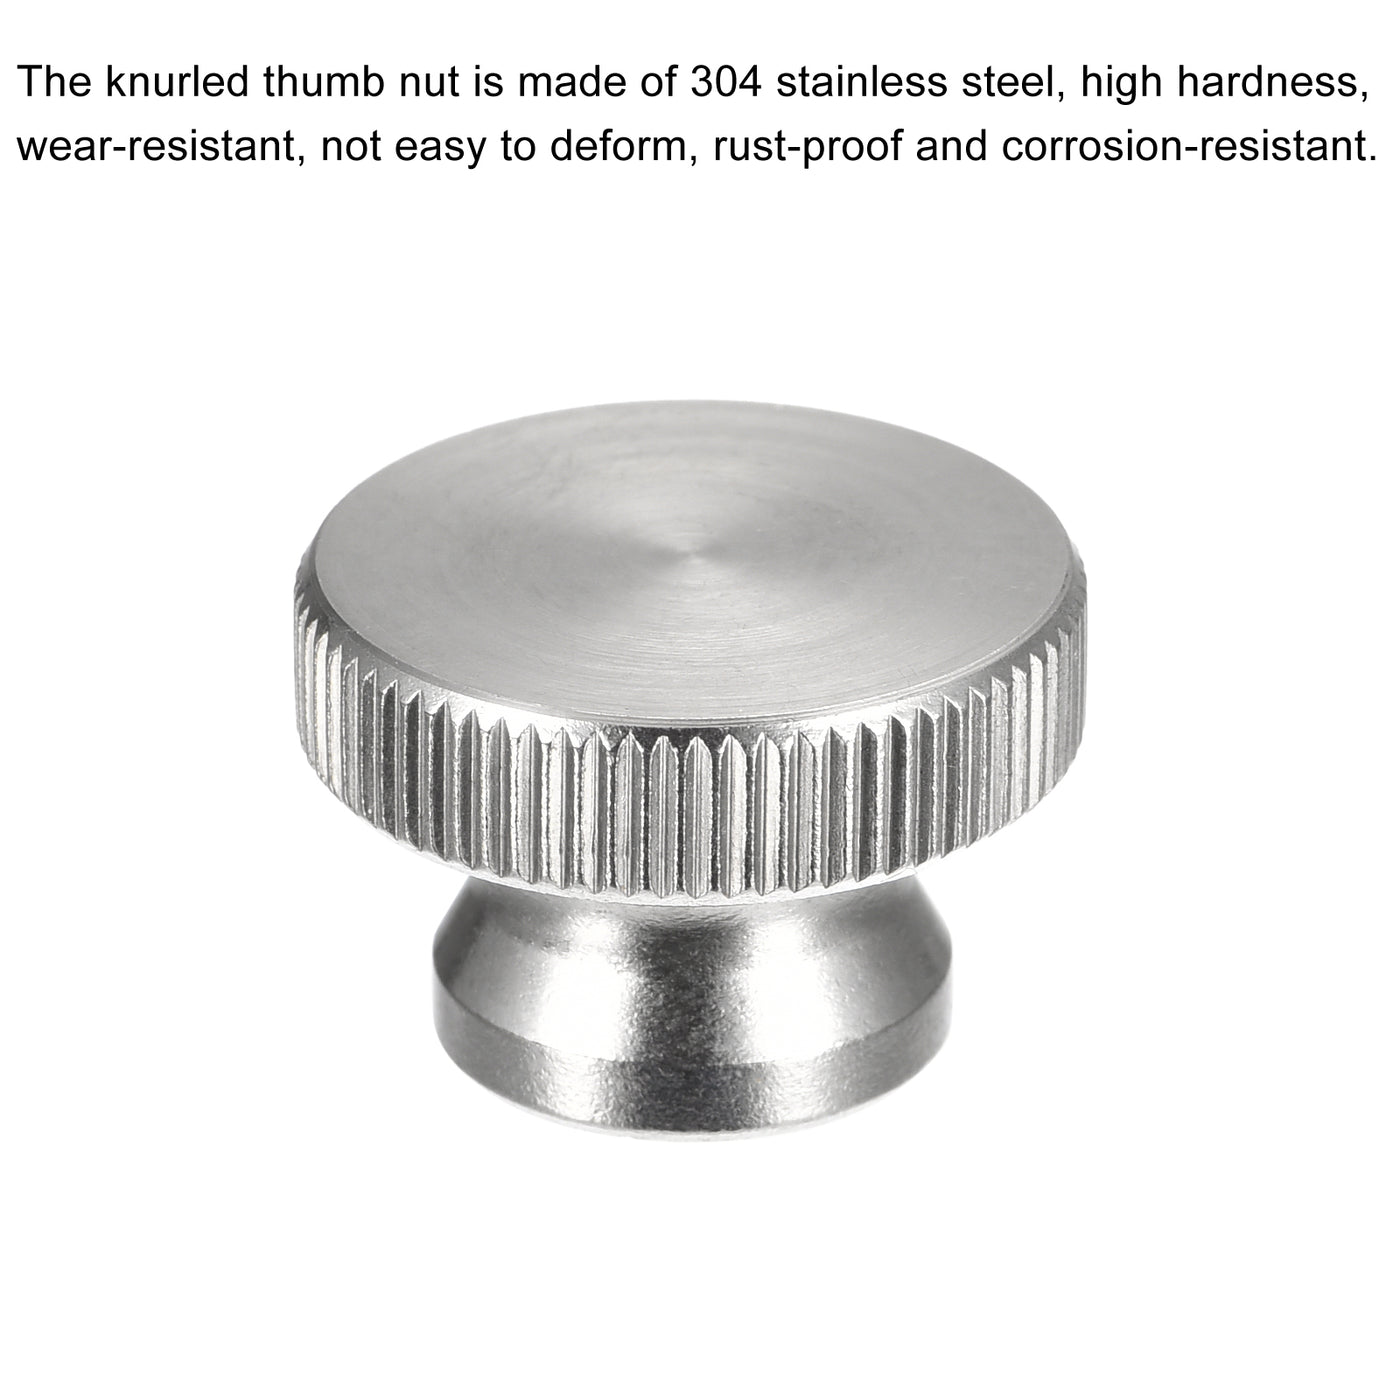 uxcell Uxcell Knurled Thumb Nuts, 2pcs M8 x D24mm x H16mm 304 Stainless Steel Blind Hole Nuts